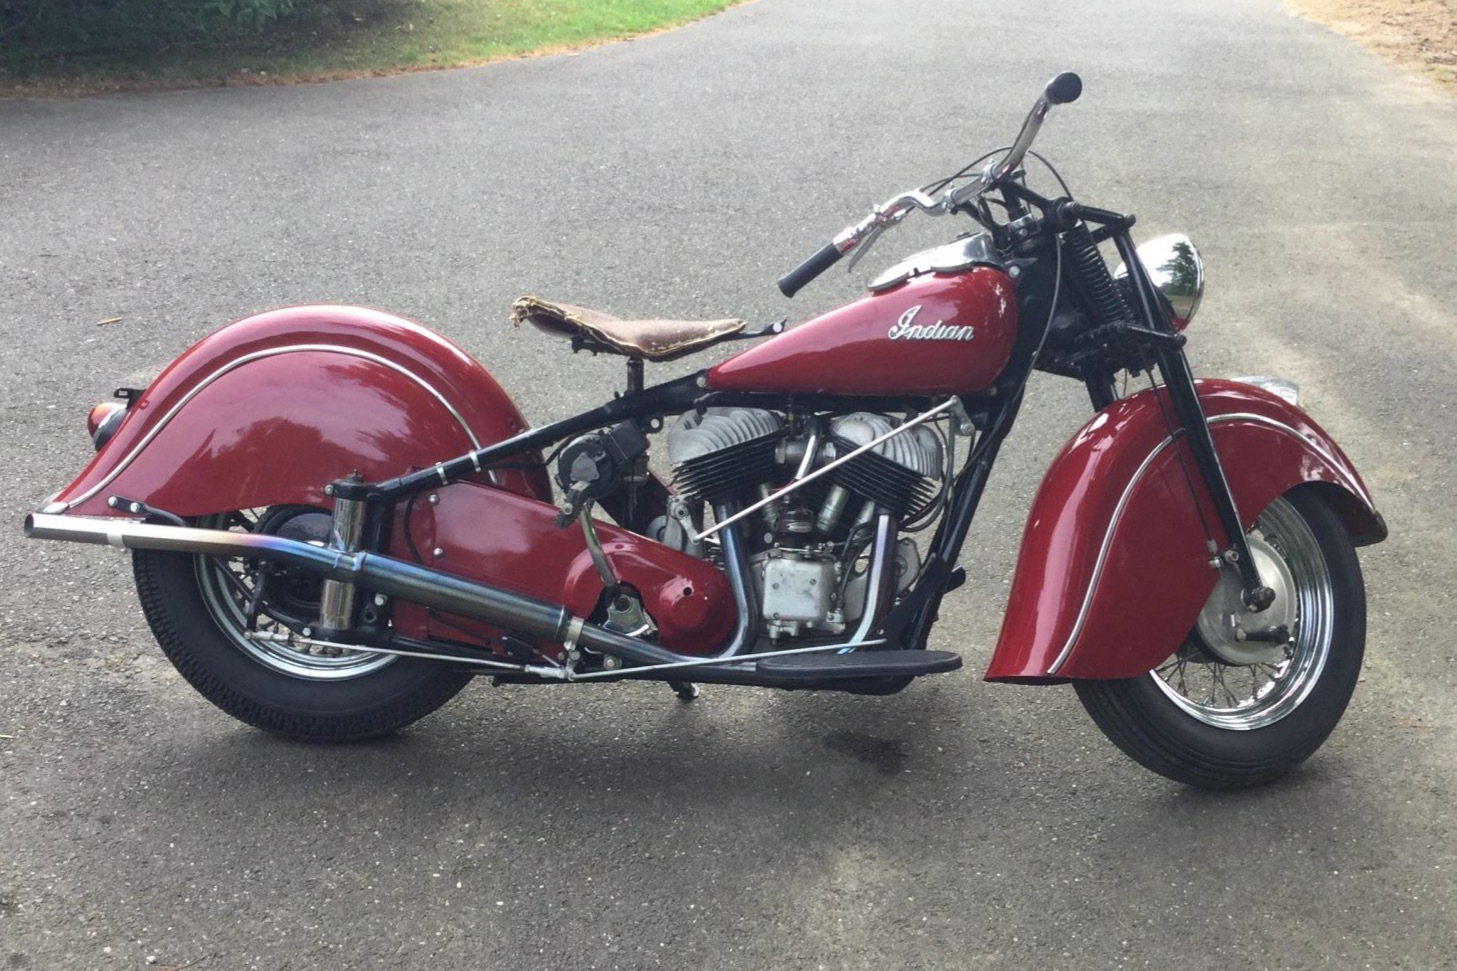 FOR SALE: Beautiful 1947 Indian Chief - webBikeWorld